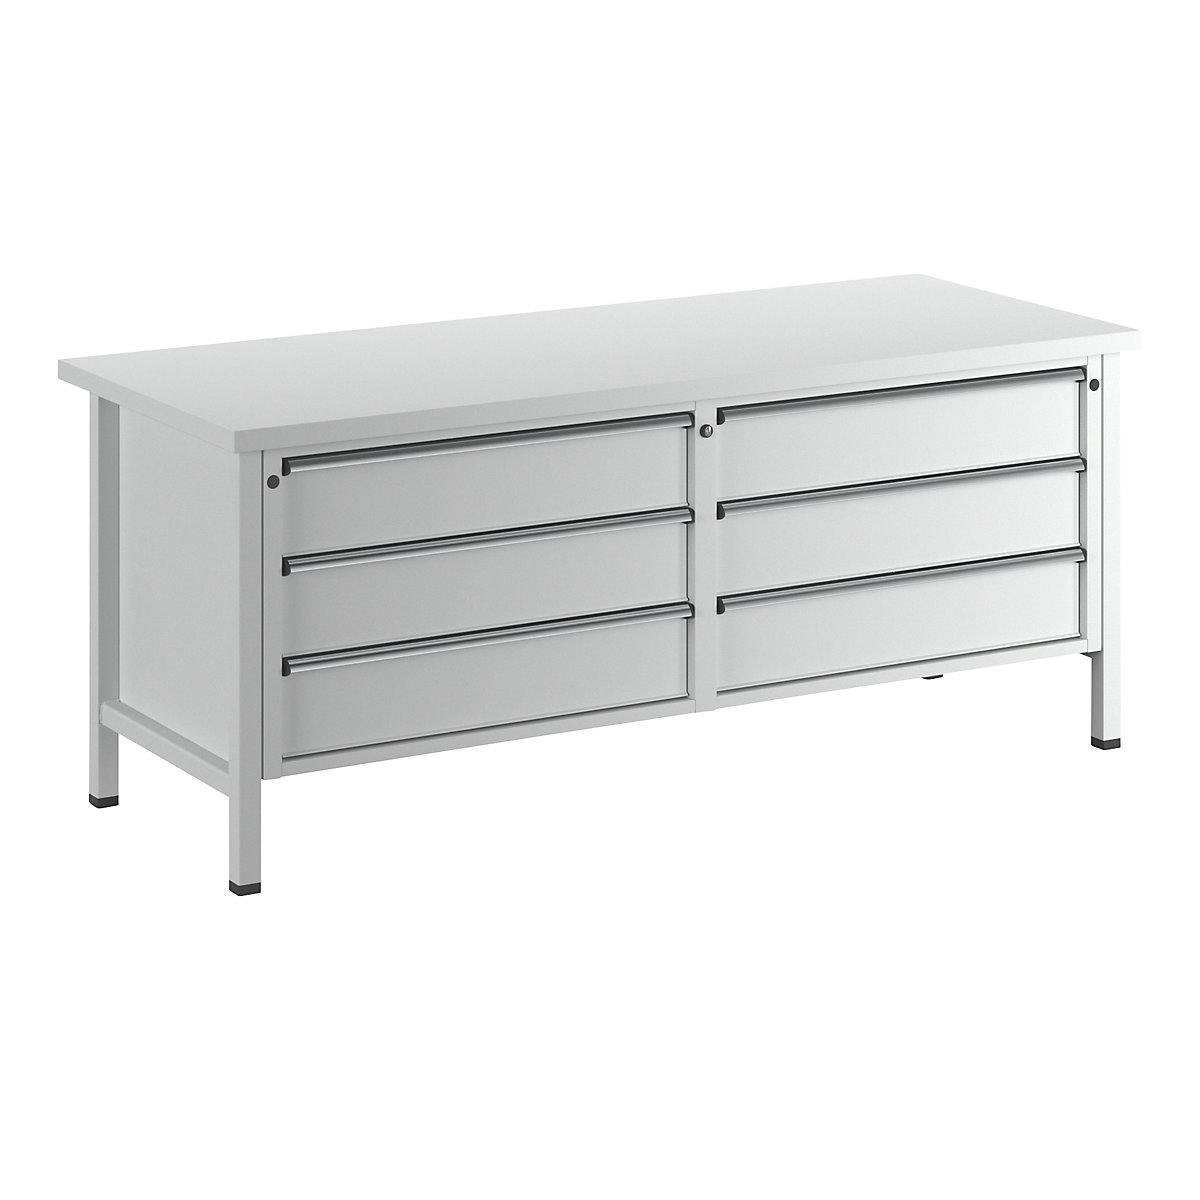 Workbench with XL/XXL drawers, frame construction – ANKE, width 2000 mm, 6 x 180 mm drawers, universal worktop, front in light grey-9